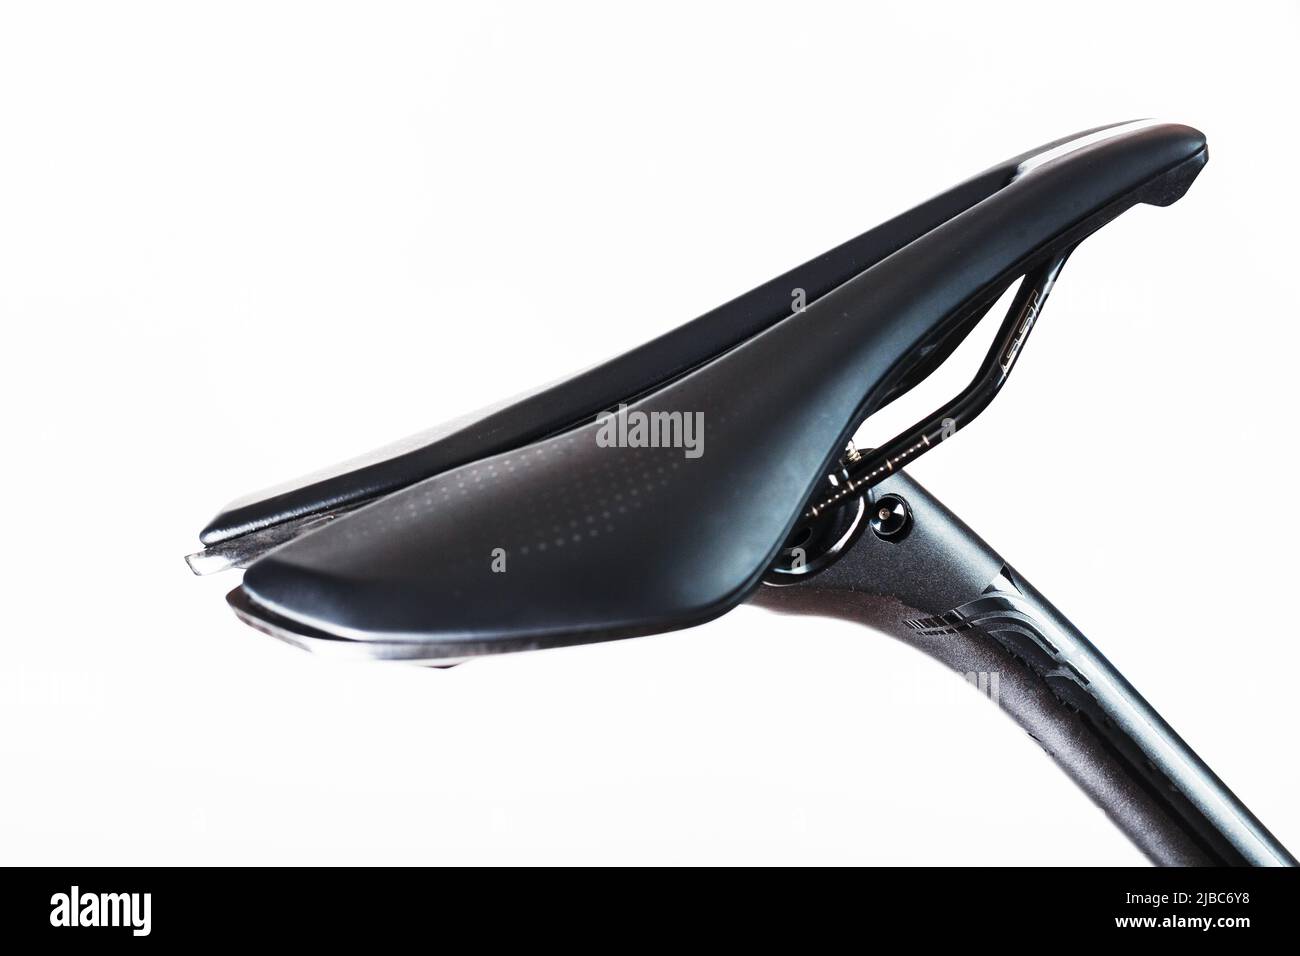 Bicycle saddle on a light background accessories for bike repair and tuning Stock Photo